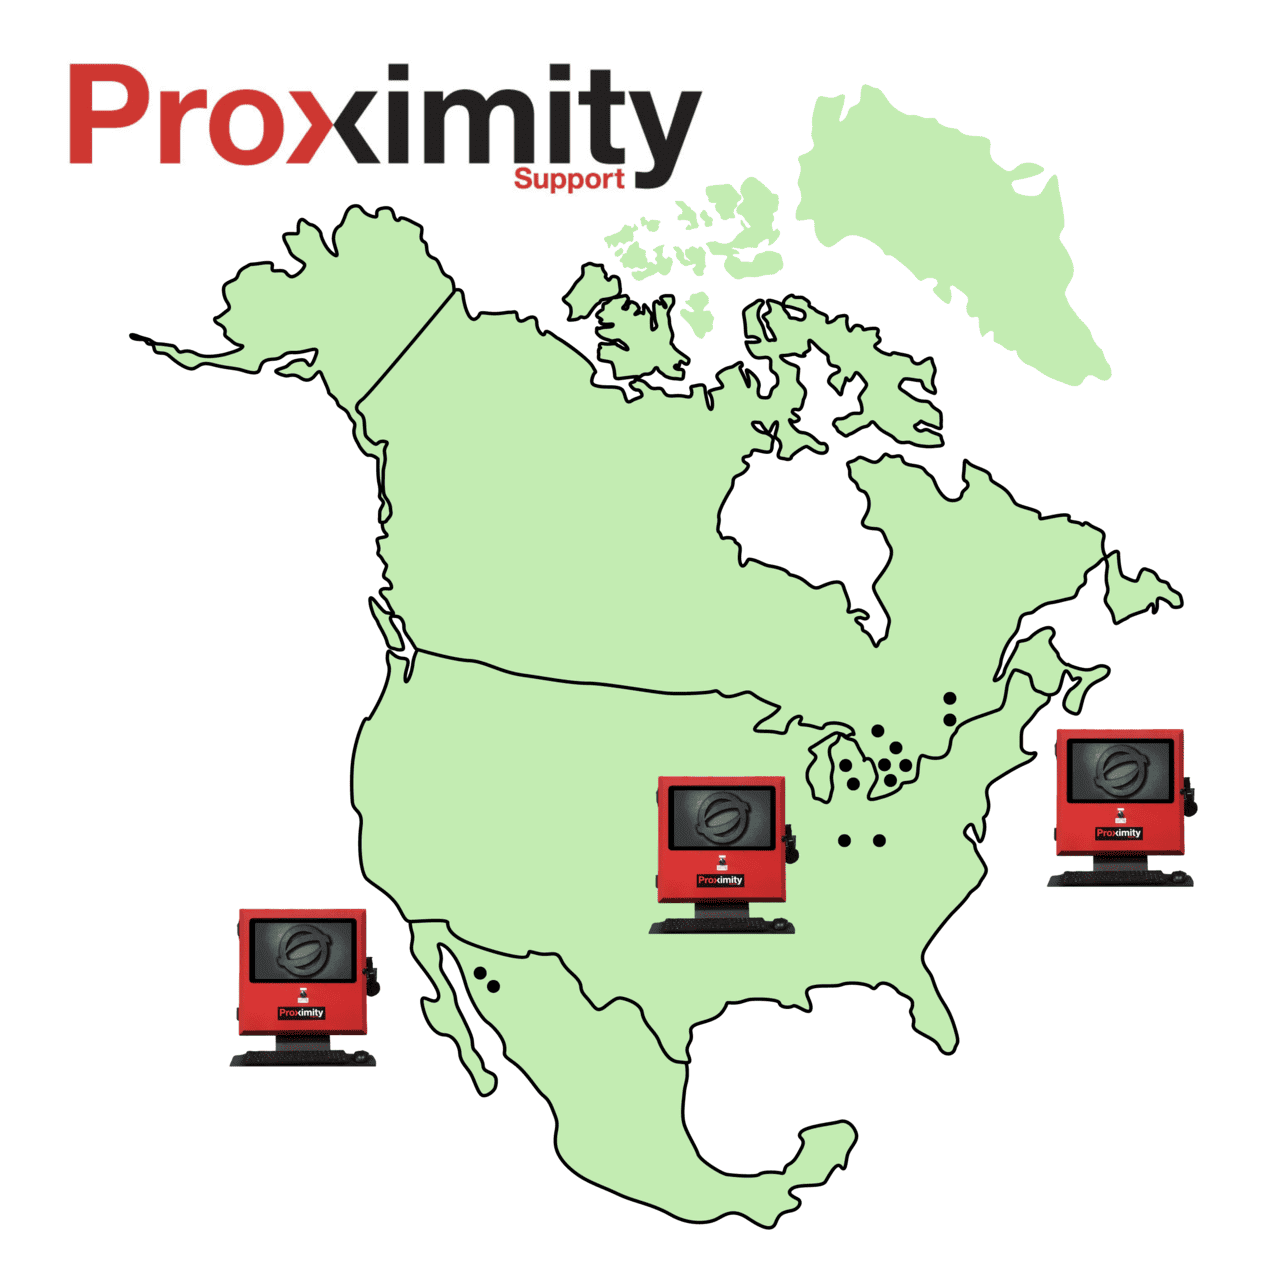 Map of BOS Proximity Support systems across North America with 1 Proximity Support Panel in each country and 16 systems total.